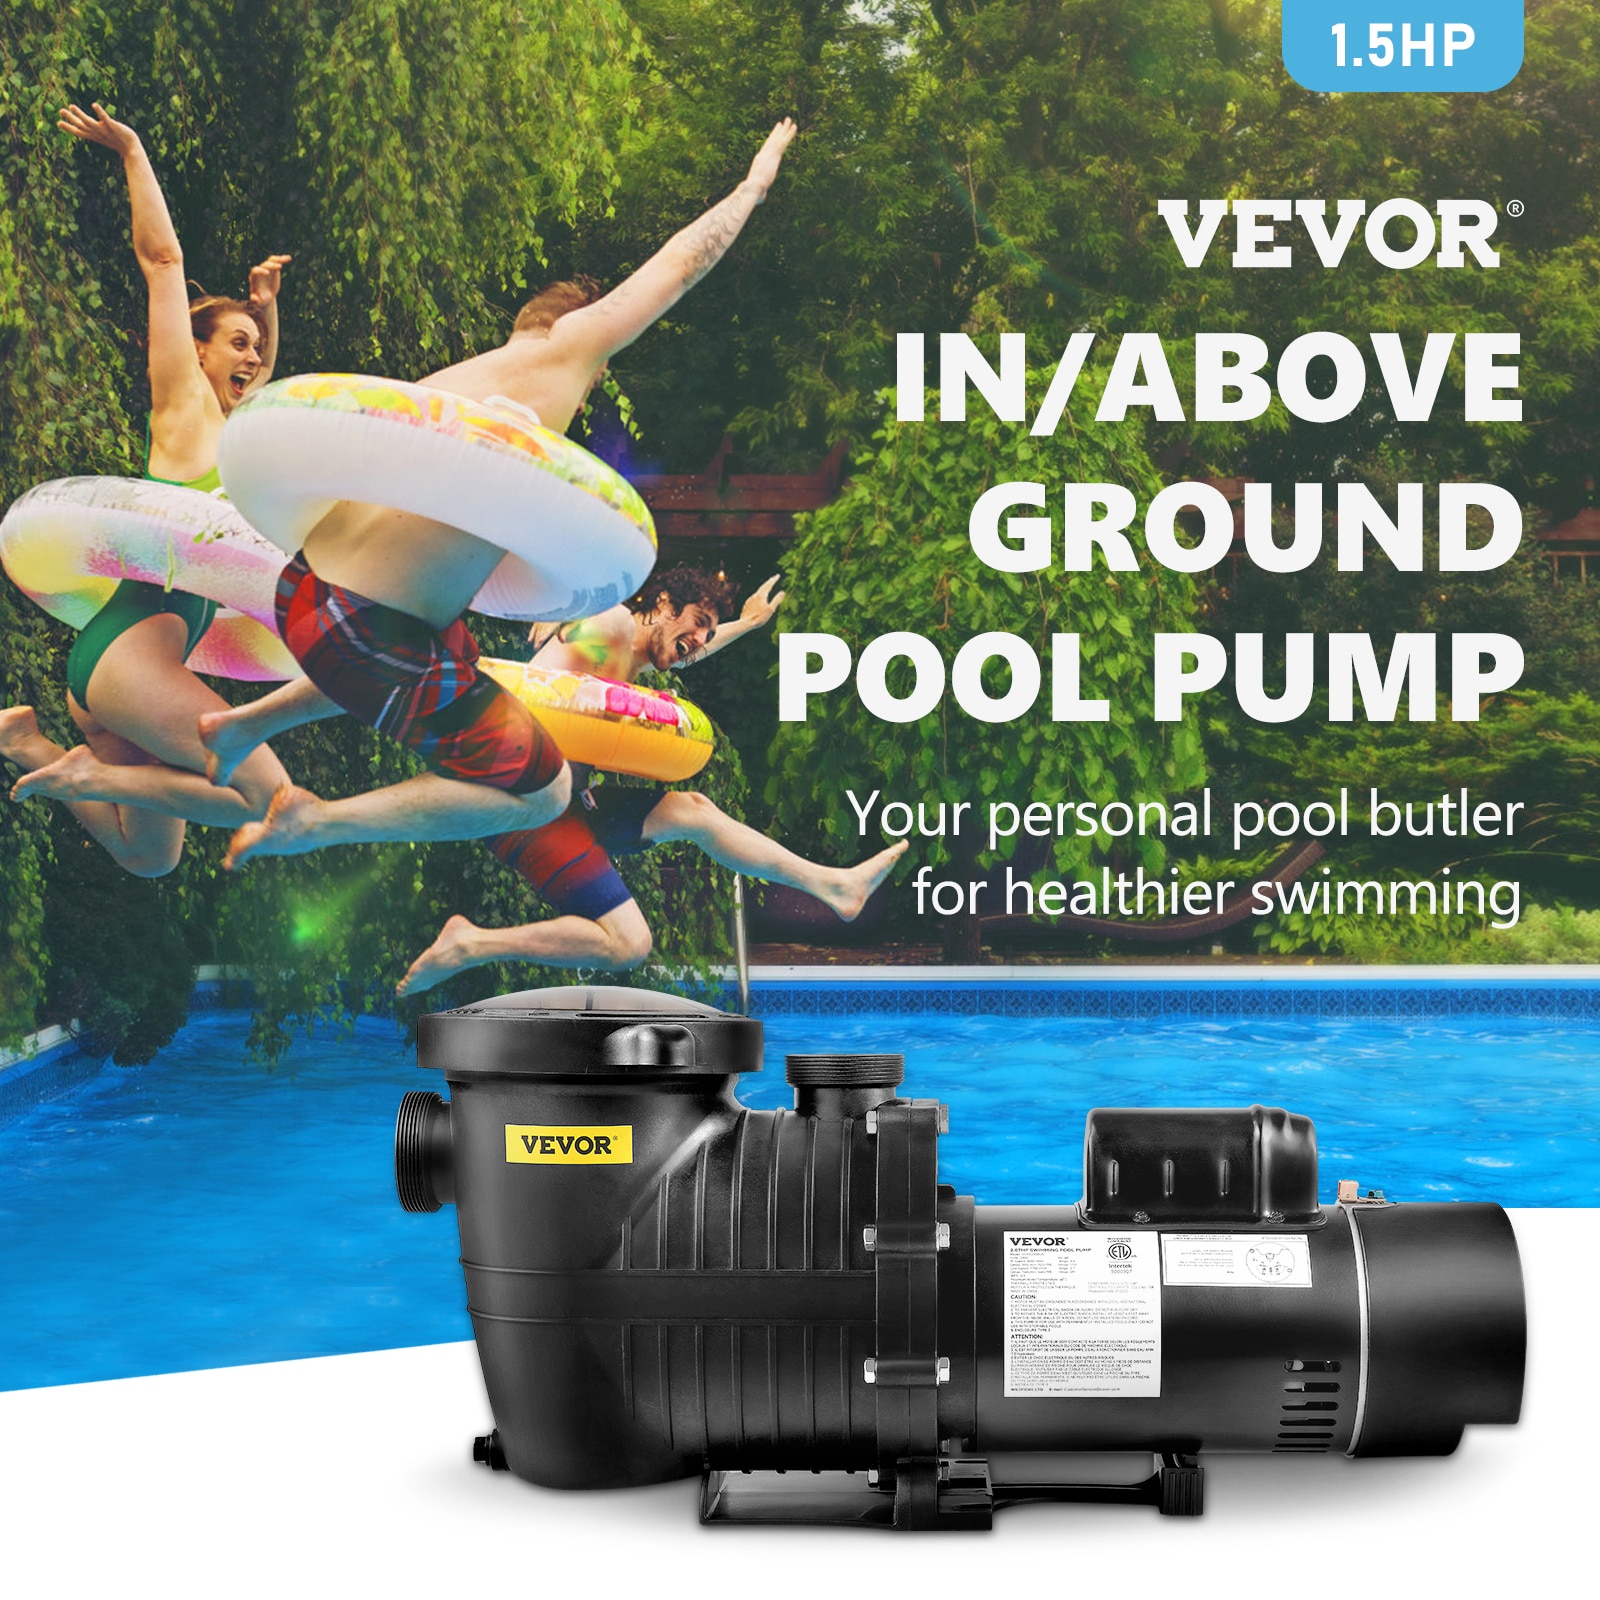 Vidapool 1.5 HP Pool Pump with timer, 7350GPH, 220V, 2 Interfaces, Powerful  In/Above Ground Self Primming Swimming Pool Pumps with Filter Basket